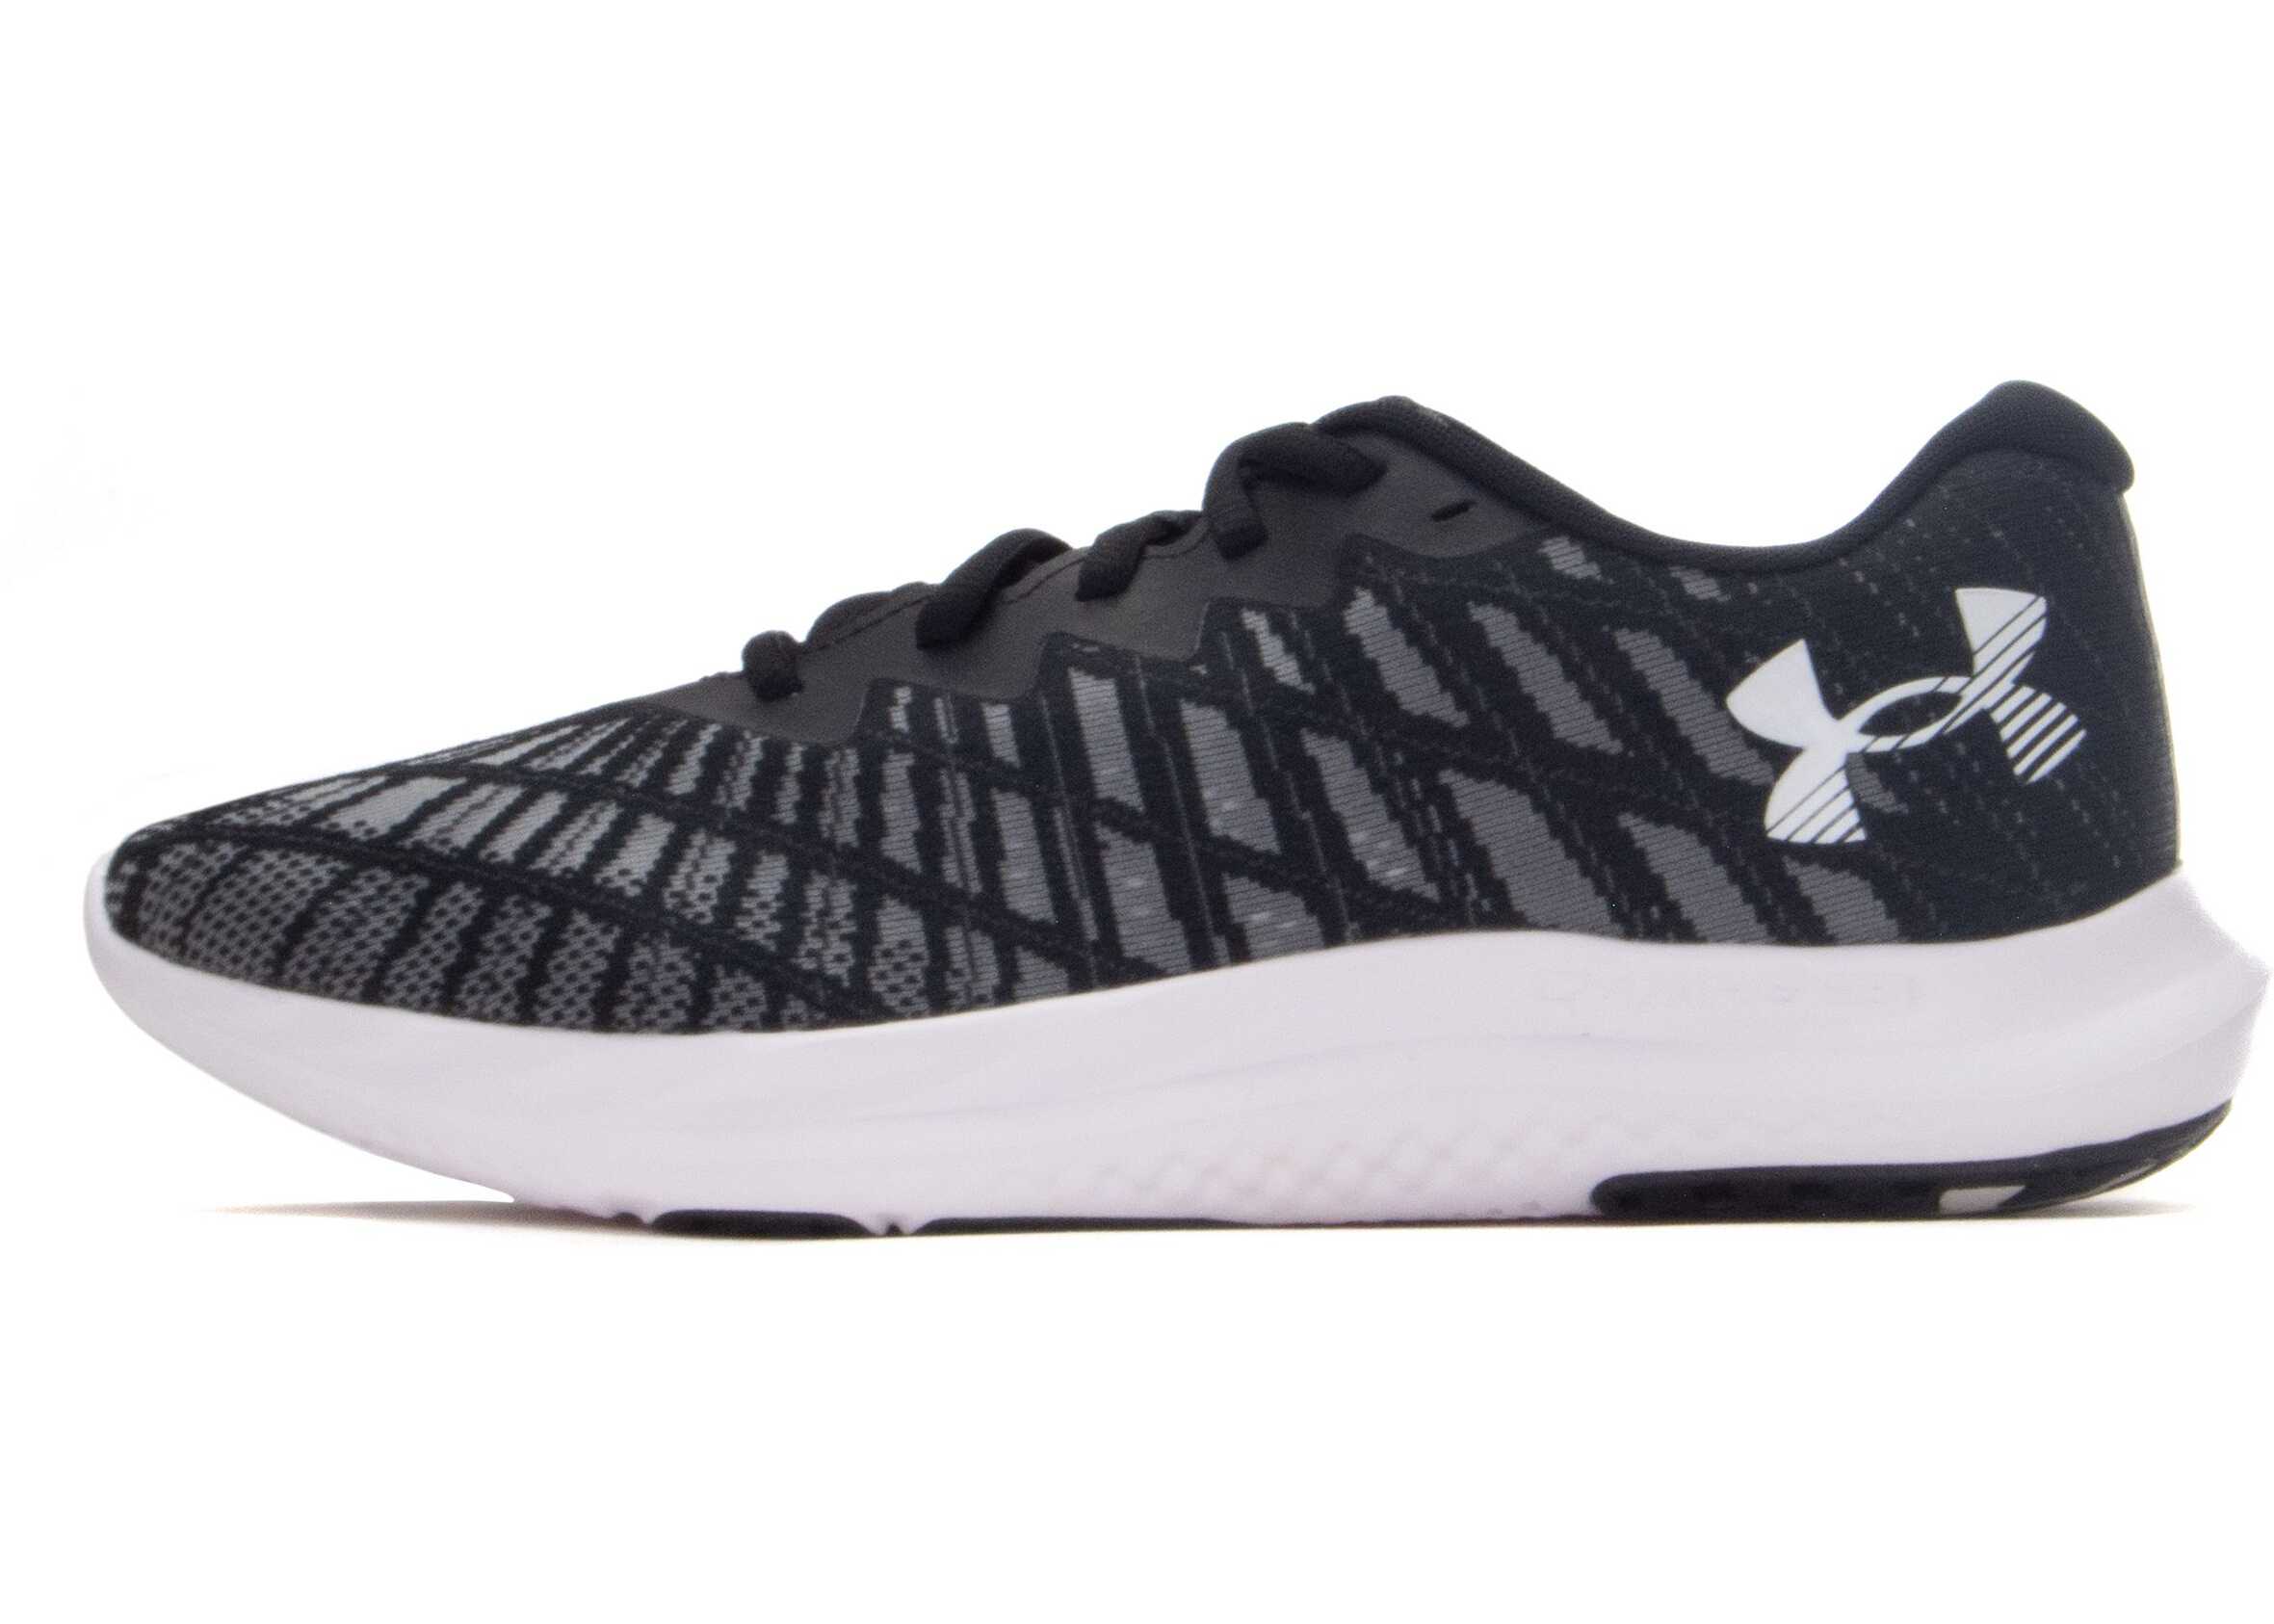 Under Armour Charged Breeze 2 Black